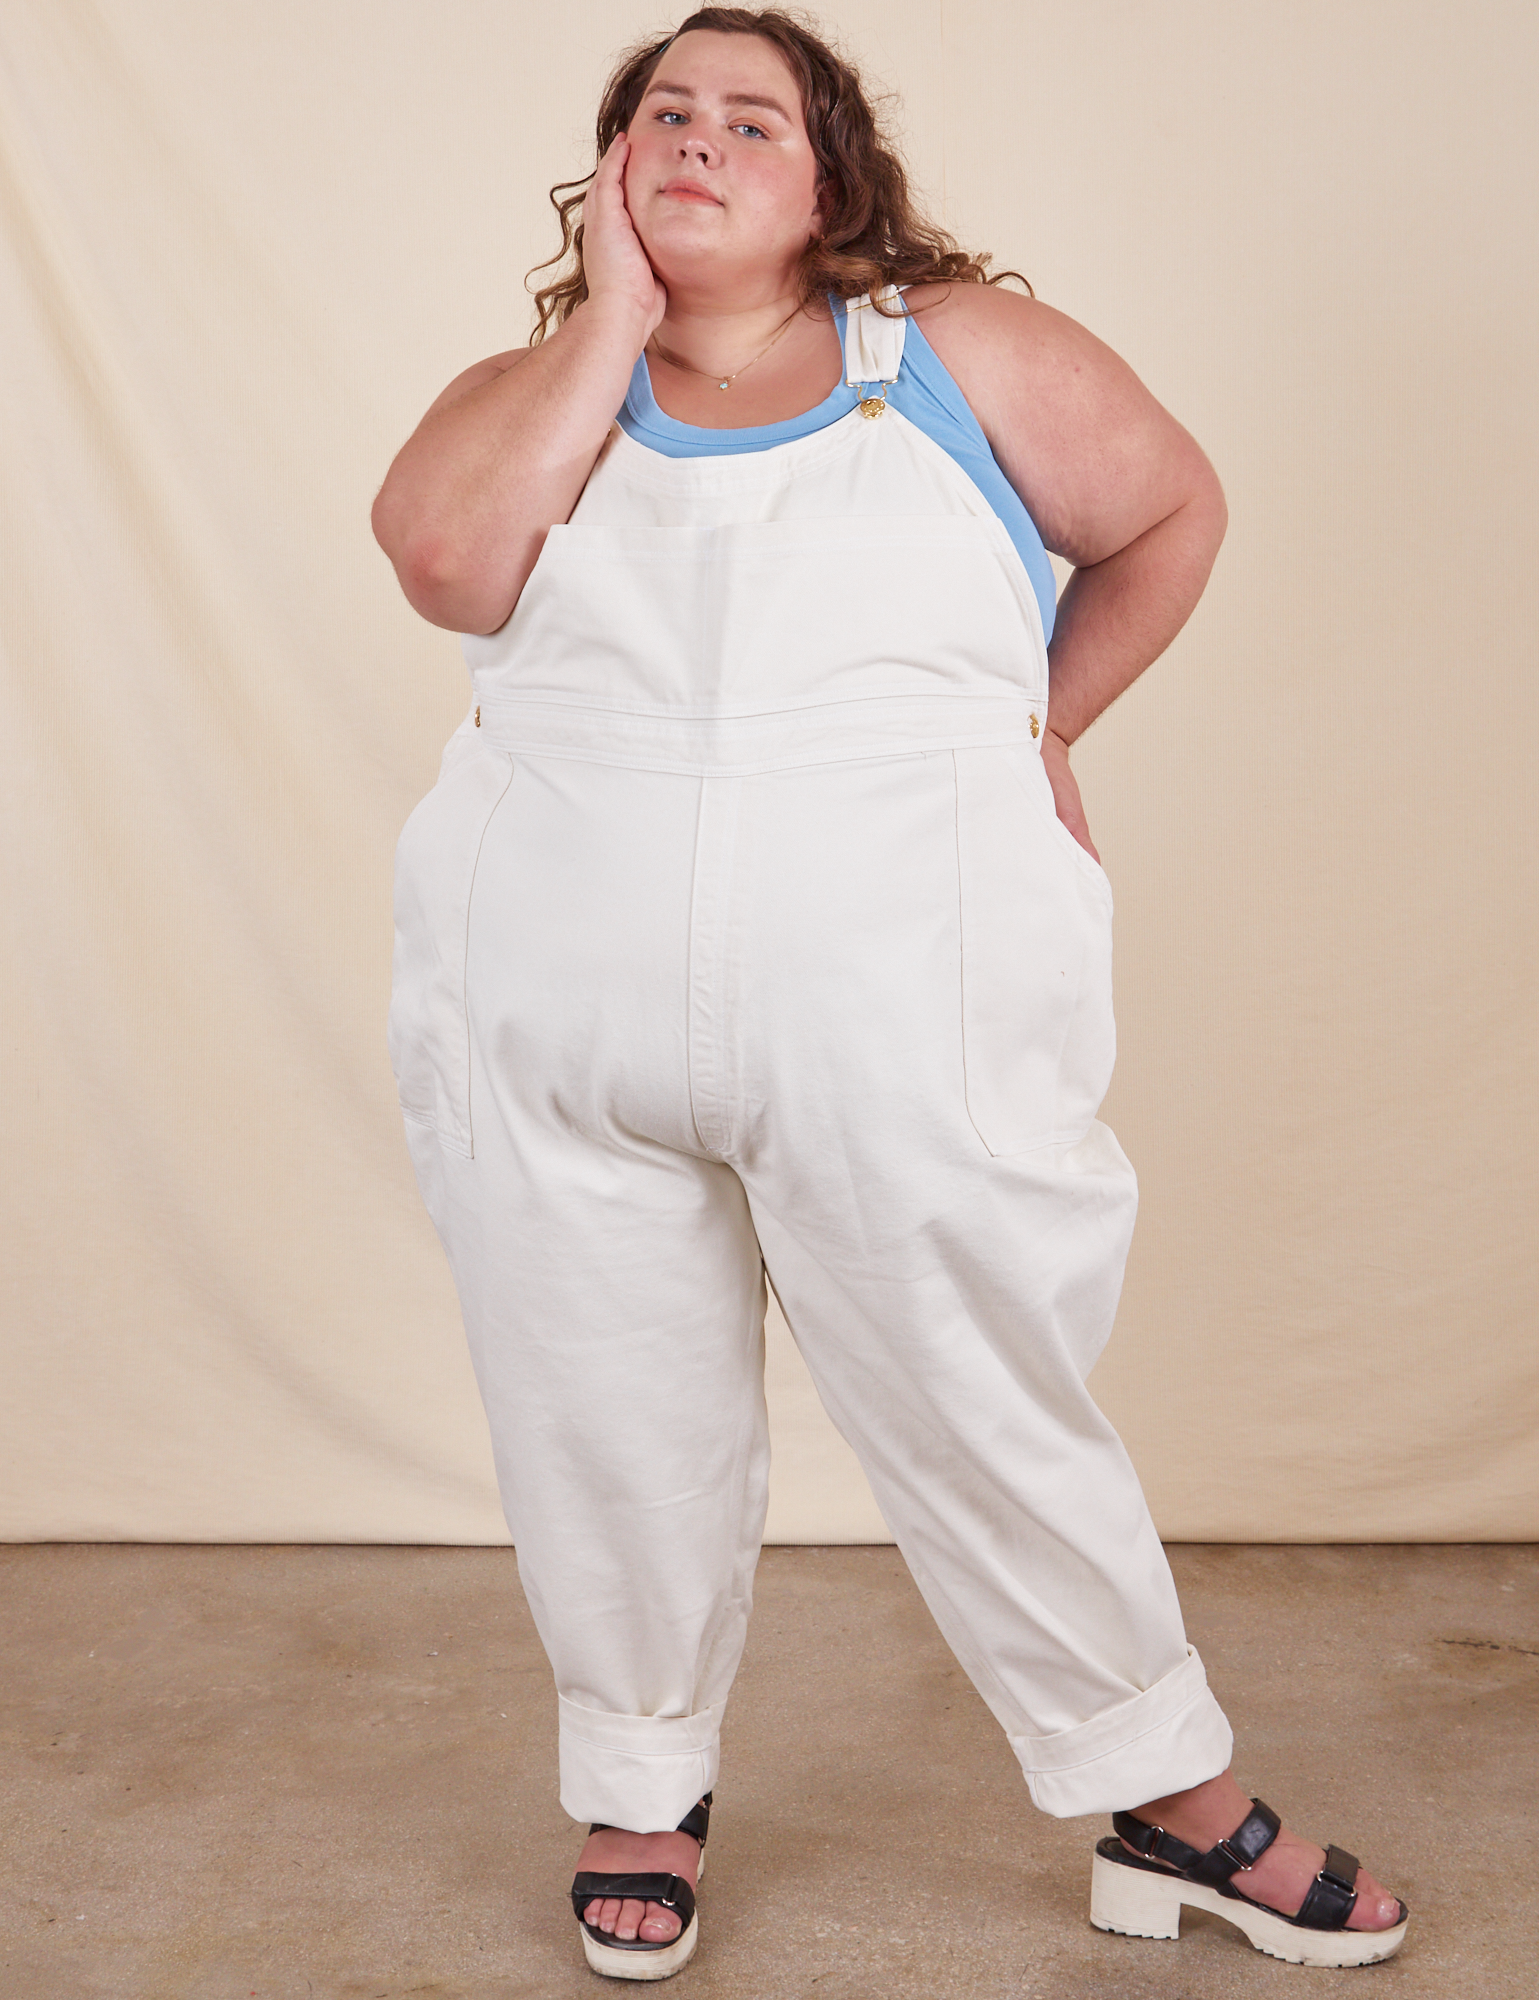 Mara is 5&#39;5&quot; and wearing 4XL Original Overalls in Vintage Off-White